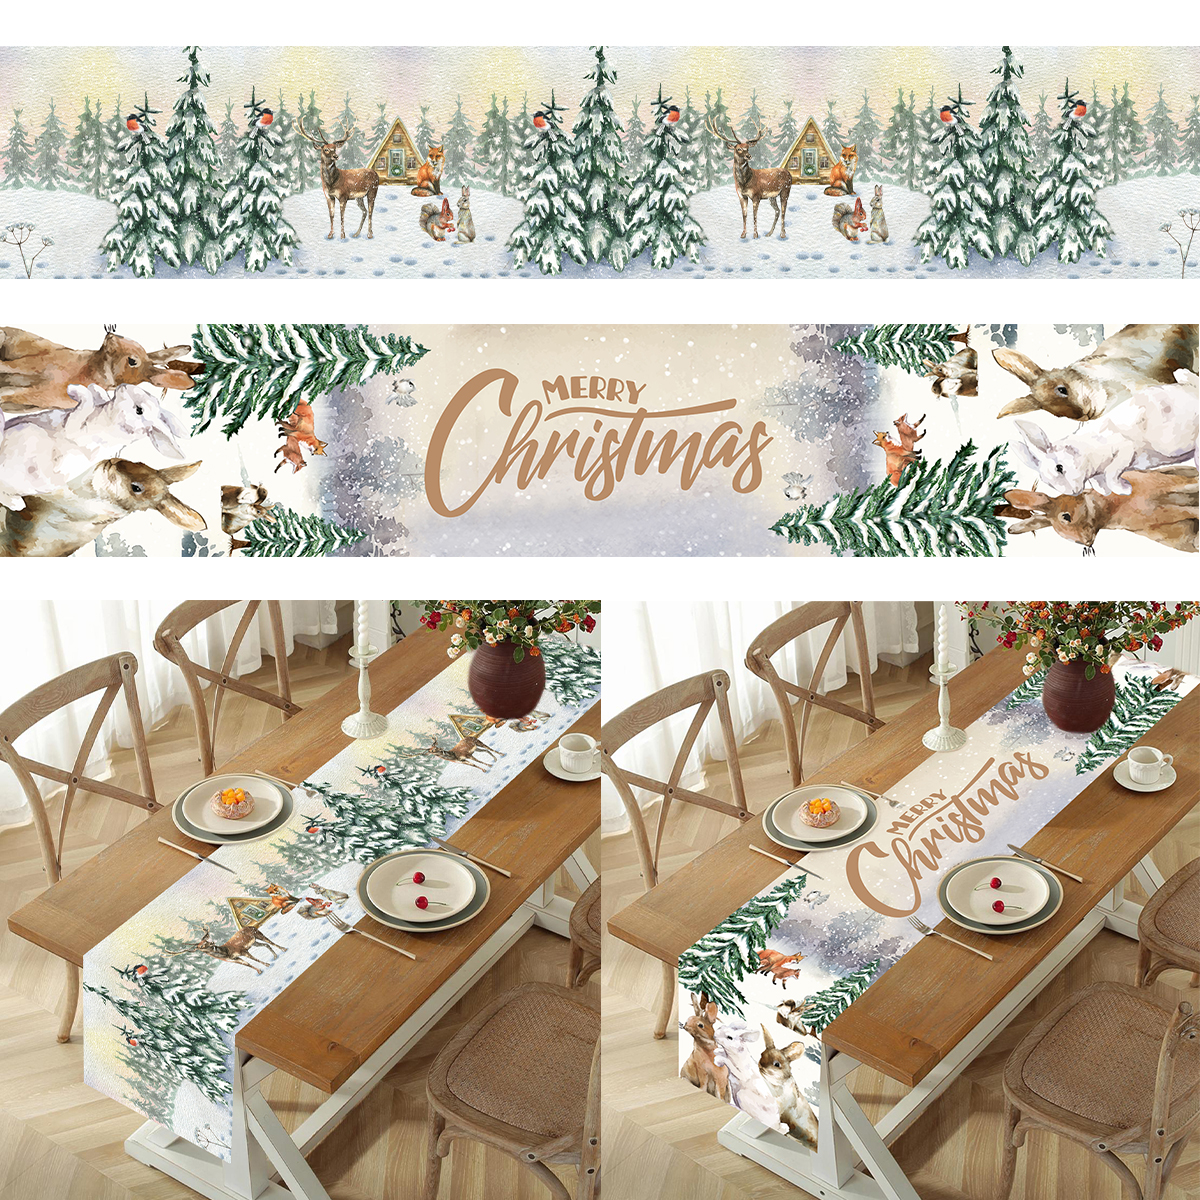 Christmas-Table-Runner-Merry-Christmas-Decoration-for-Home-Xmas-Party-Decor-2023-Navidad-Notal-Noel-Ornament